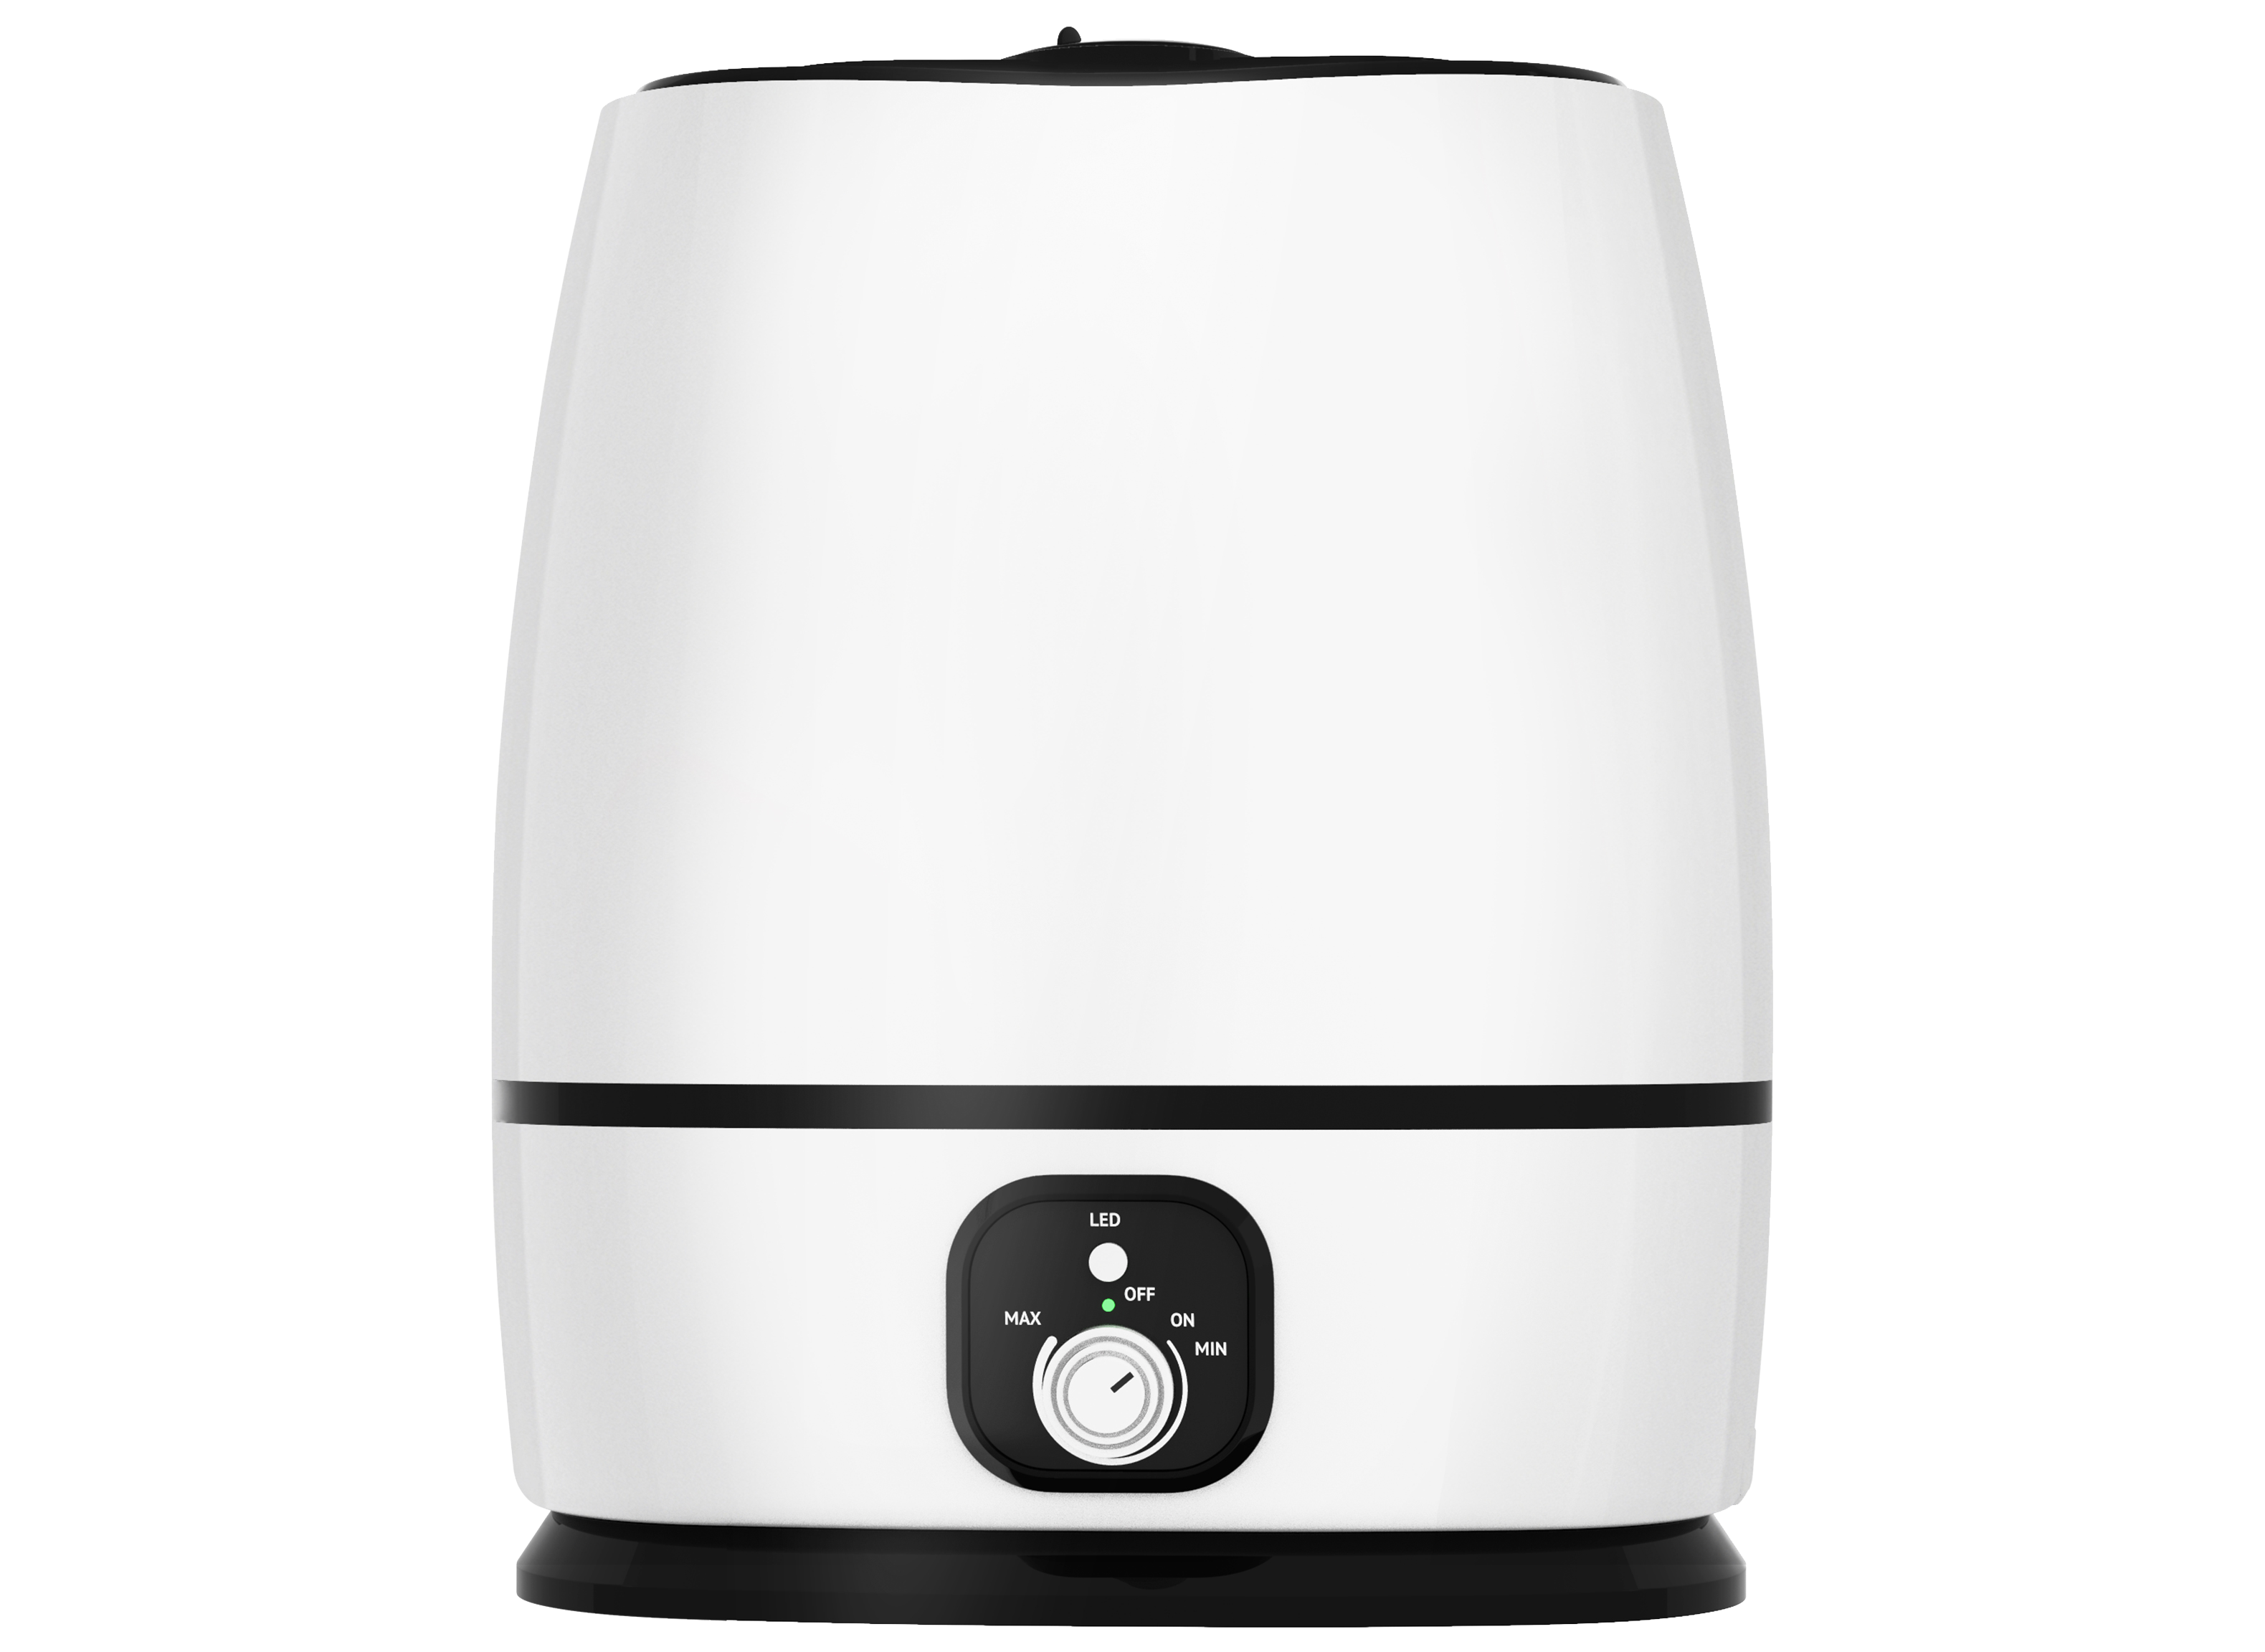 Everlasting Comfort Ultrasonic Humidifier Review - Consumer Reports